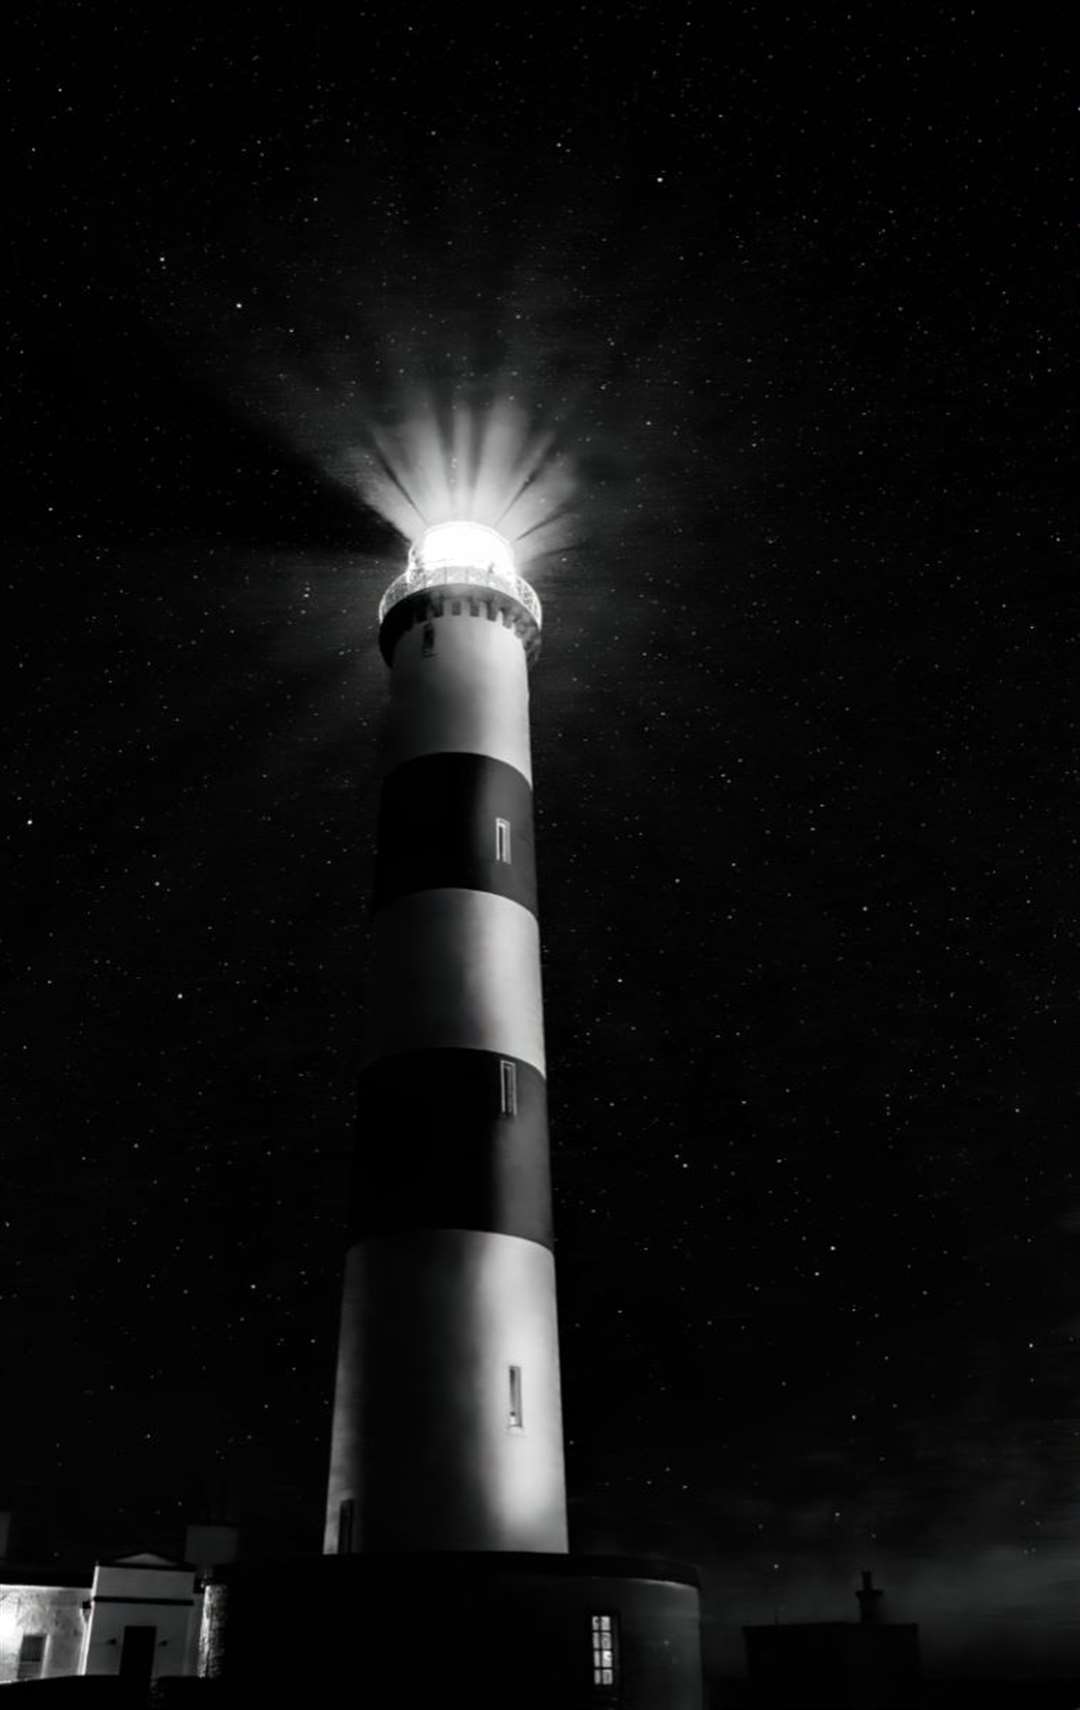 Tarbat Ness Lighthouse by Zoe Gray came second in the monochrome class.